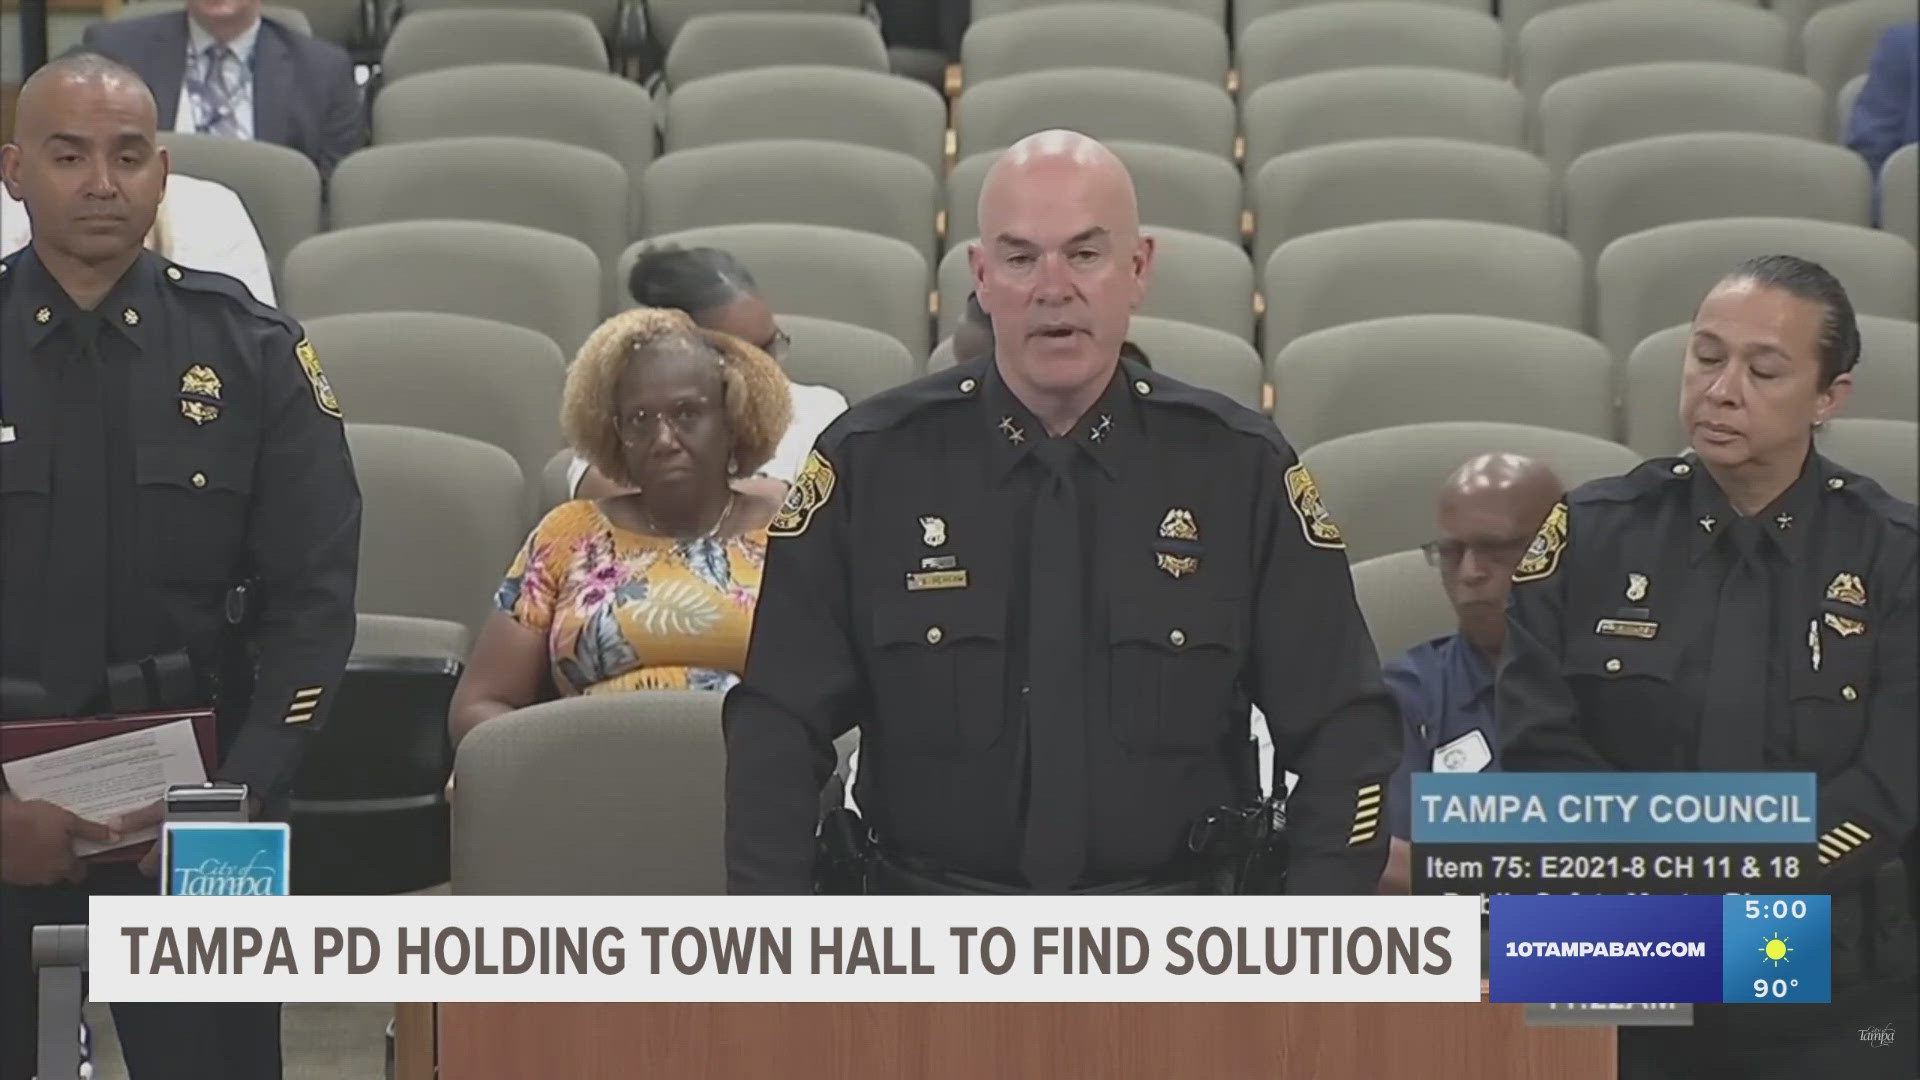 Tampa Police Department hosts a town hall to discuss solutions for the rise in gun violence.